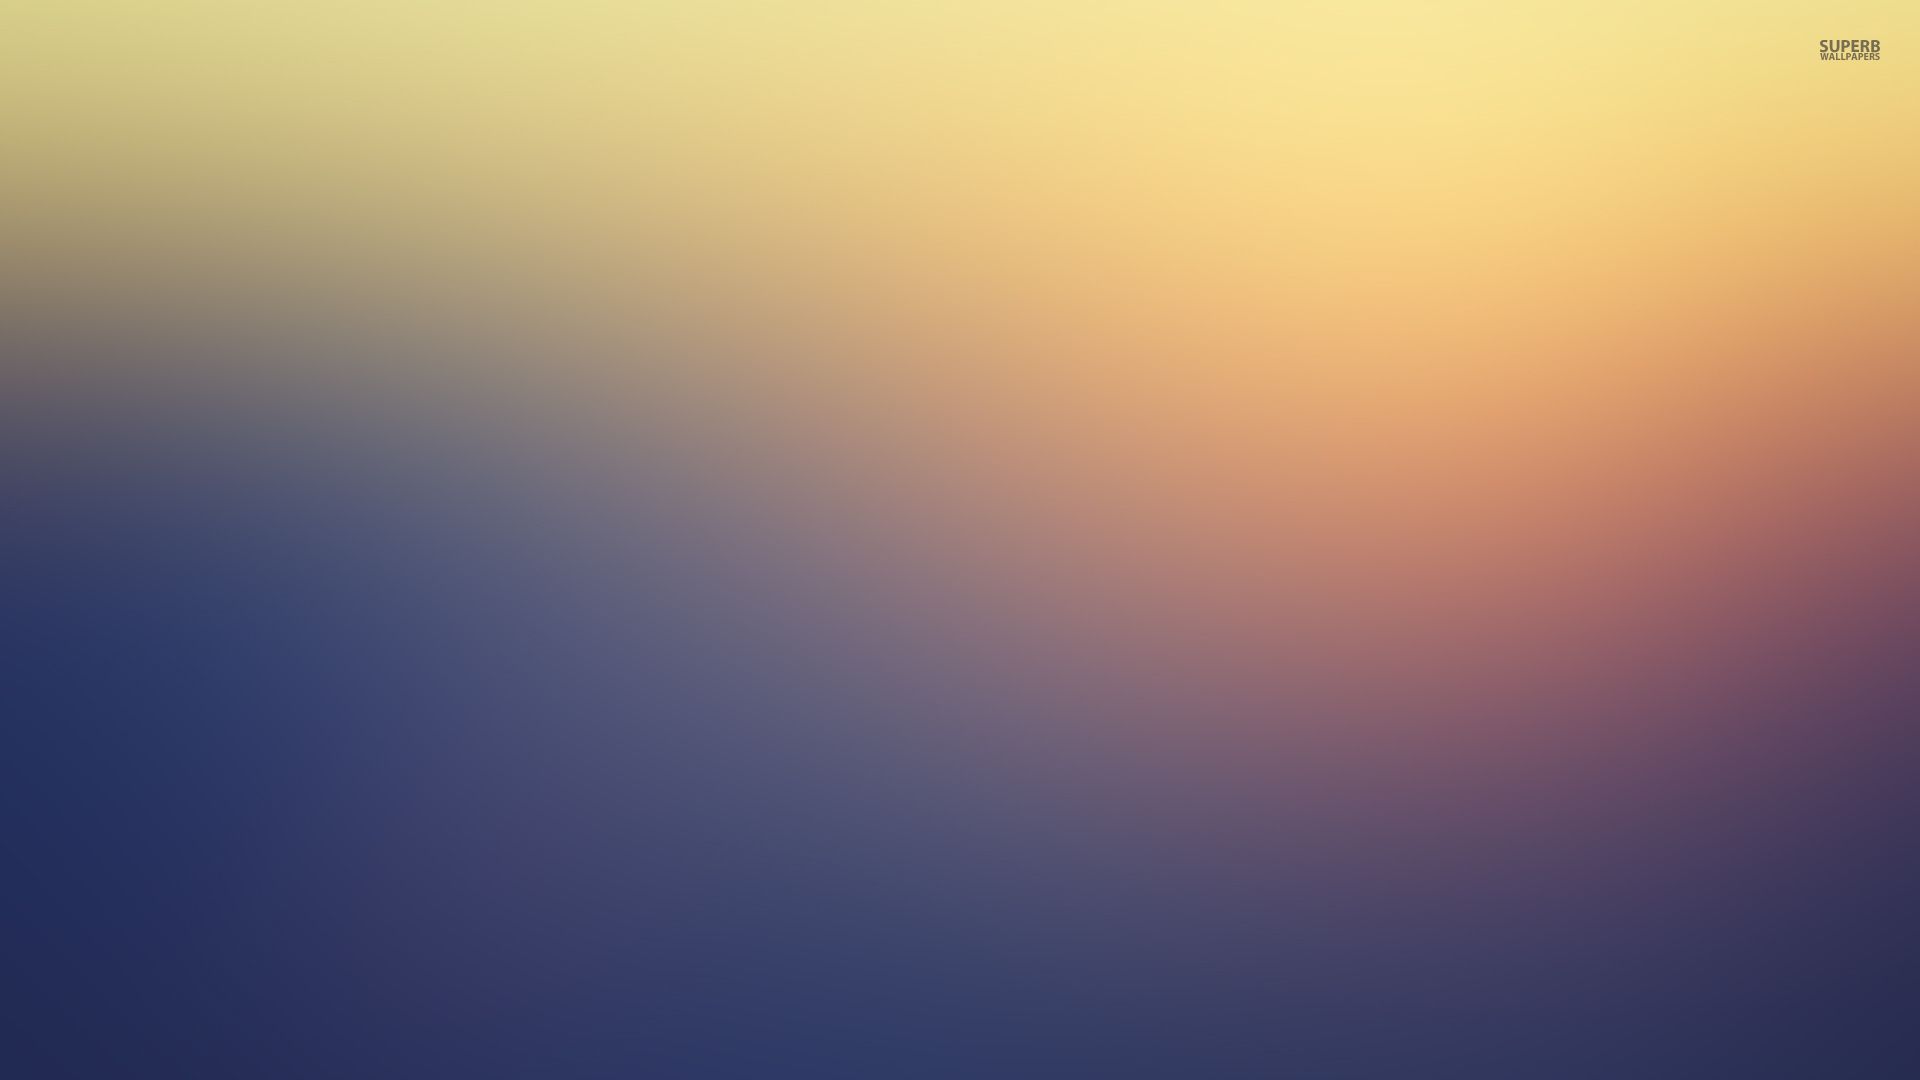 Colorful blur wallpaper - Abstract wallpapers - #46754